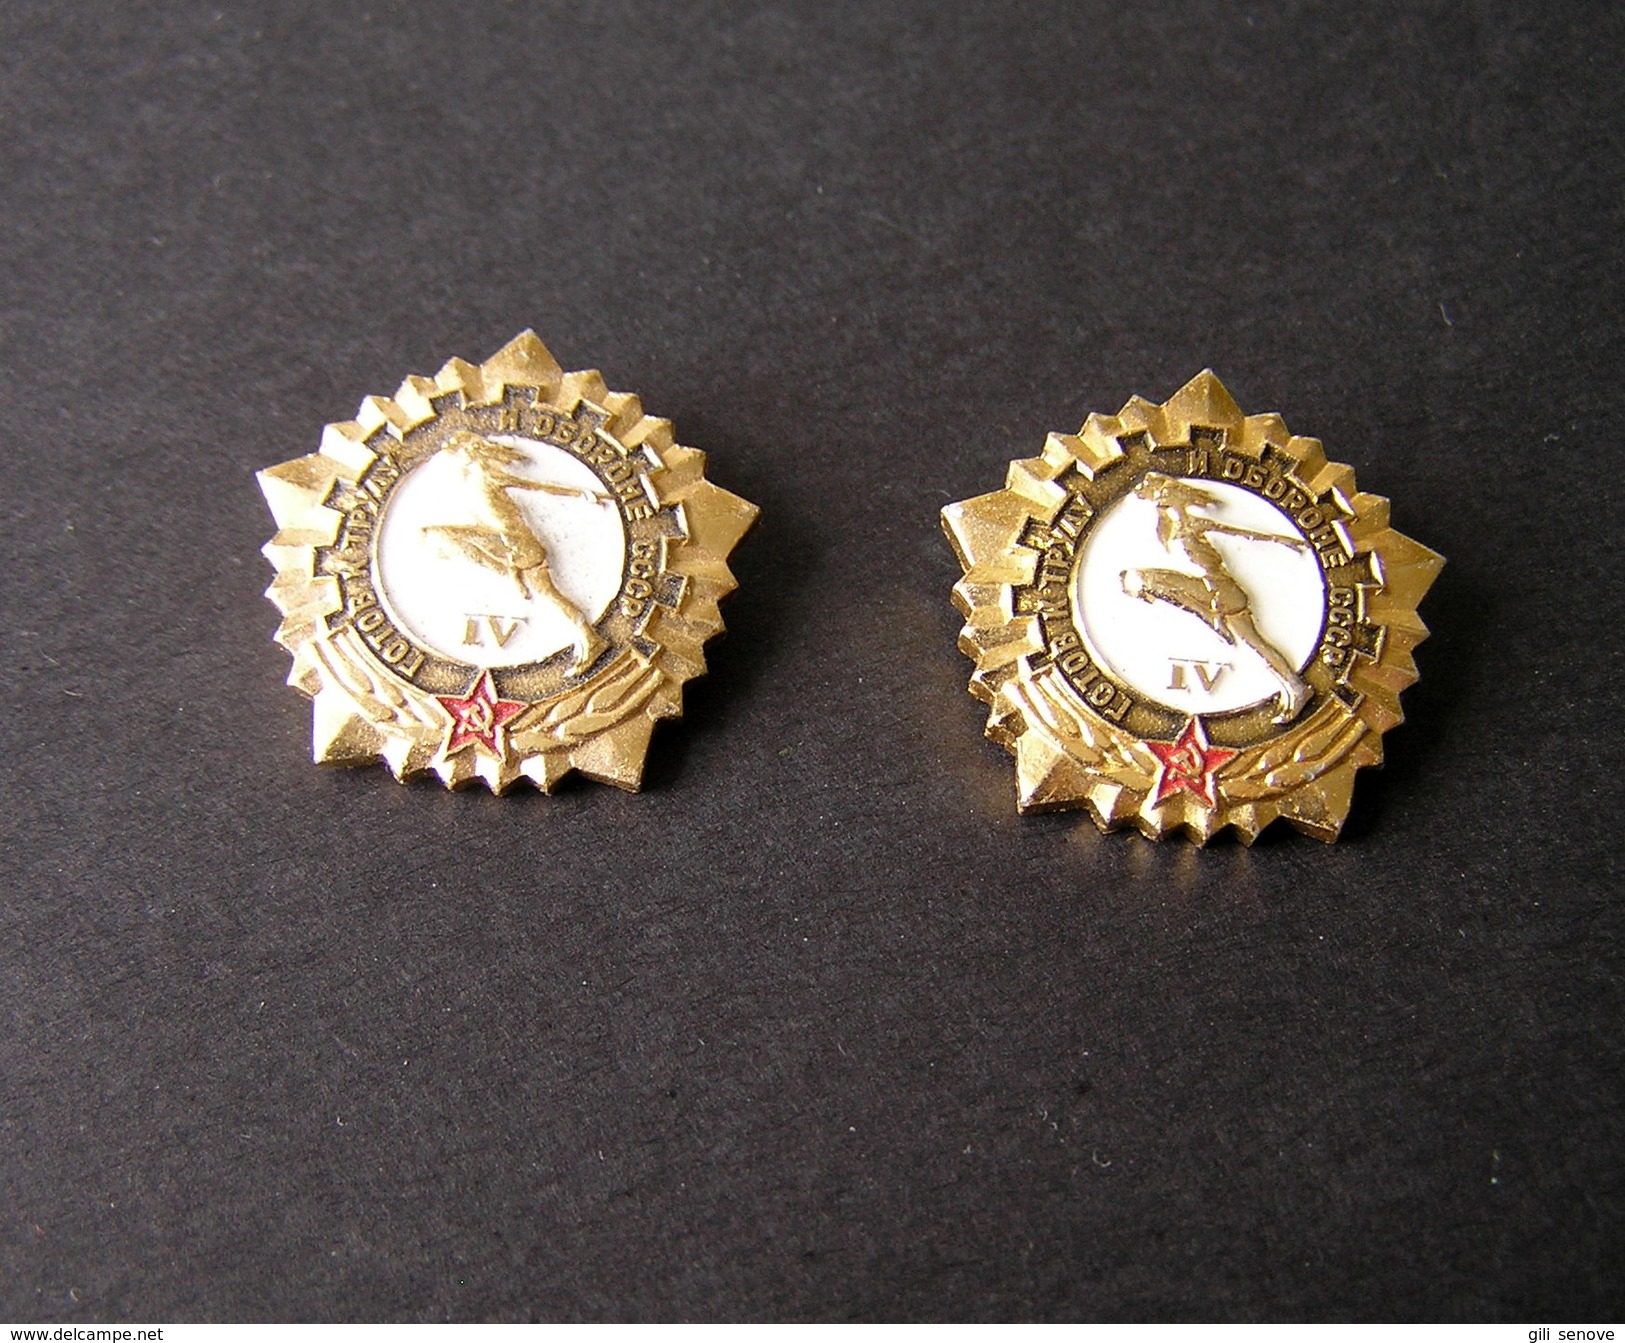 1970s USSR Russia Ready For Civil Defense And Labor IV Degree Pin Badges - Russia